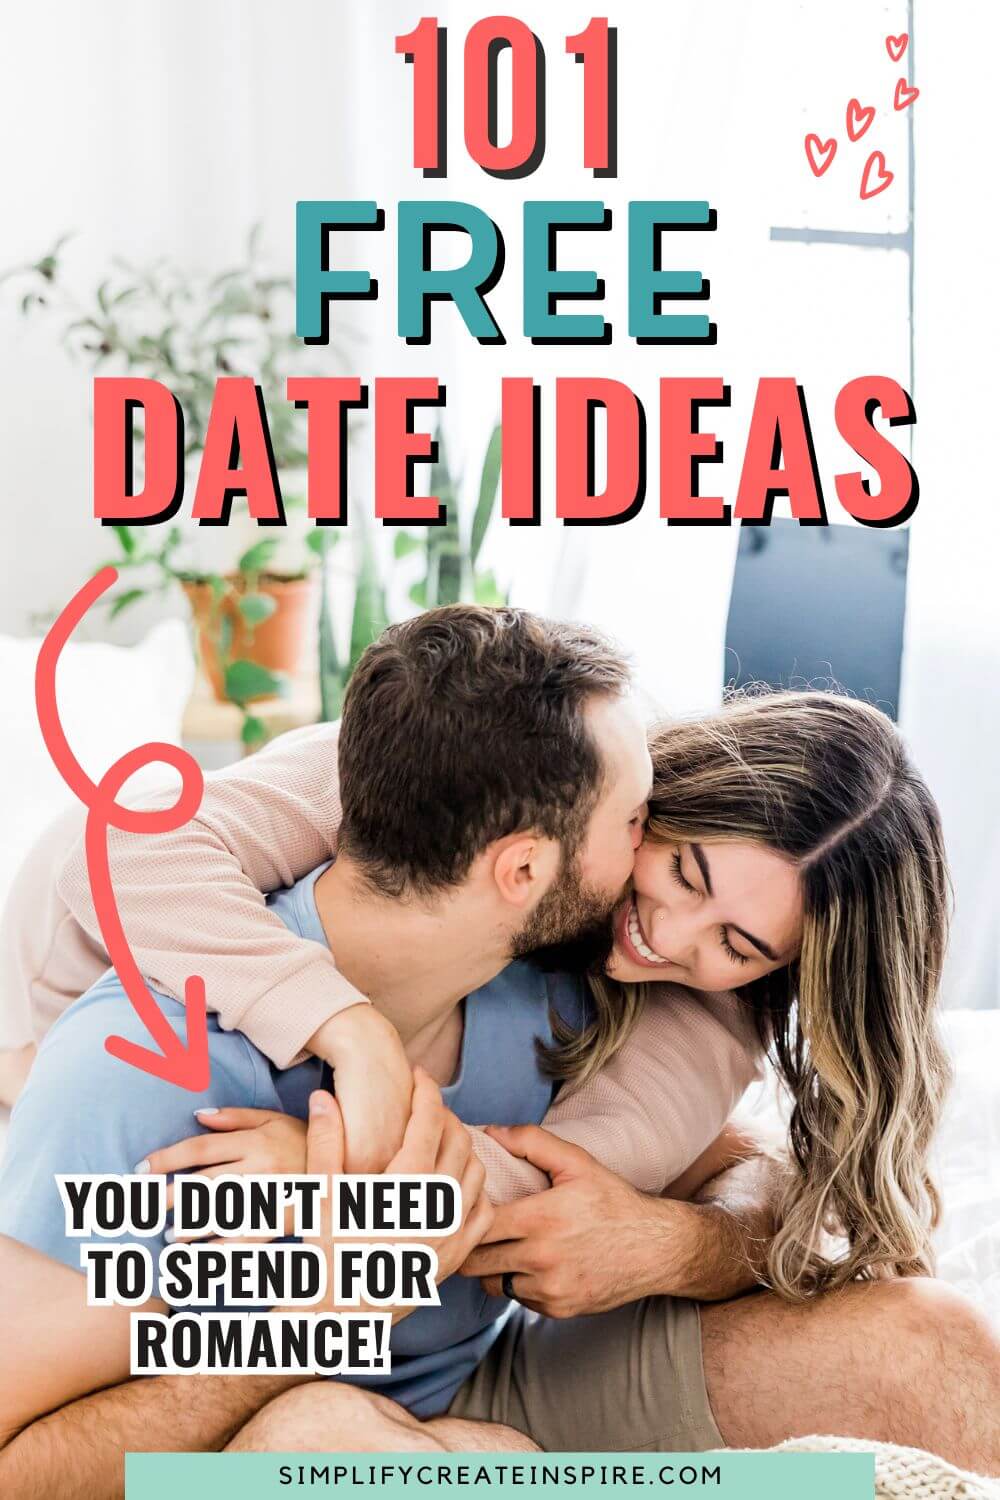 101 free date ideas you don't need to spend for romance.